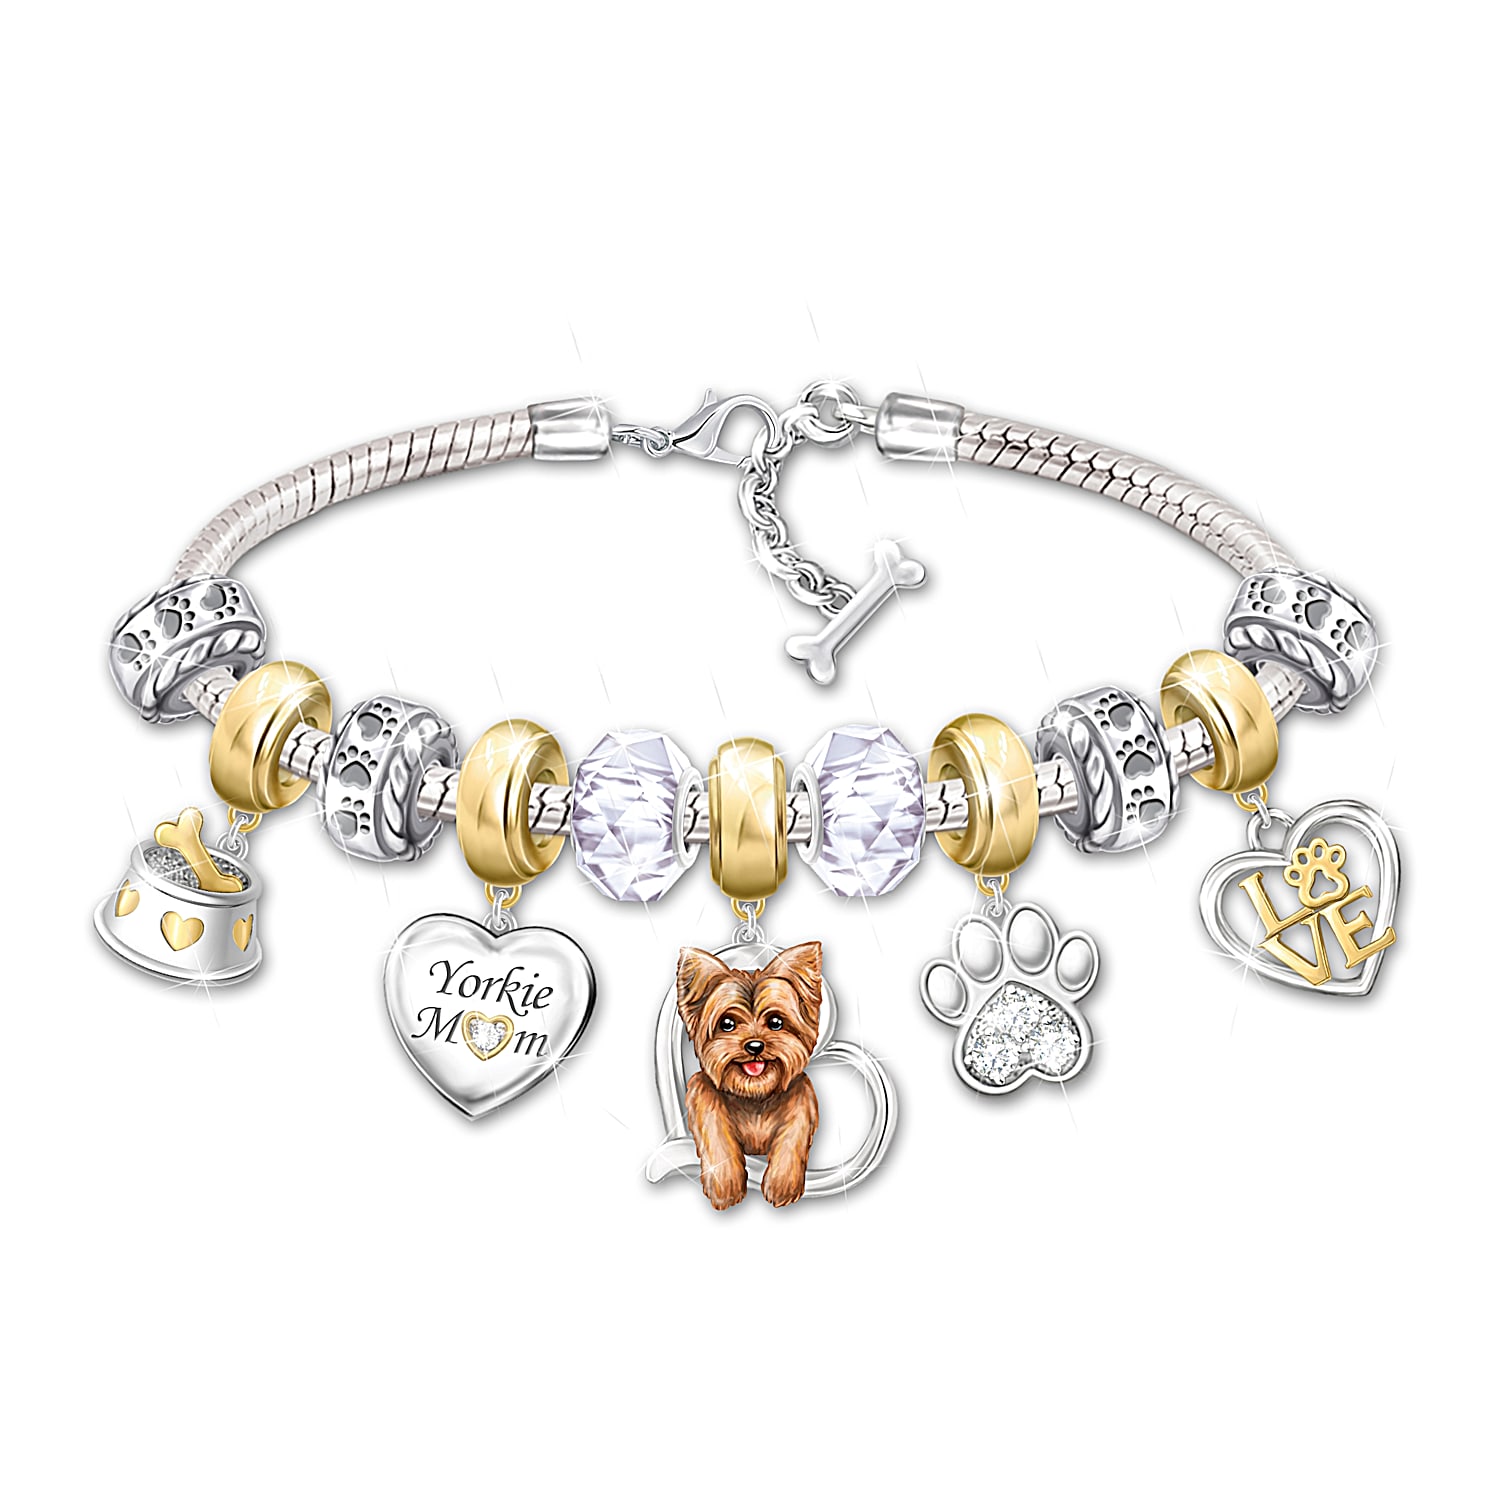 chanel charms for bracelets making